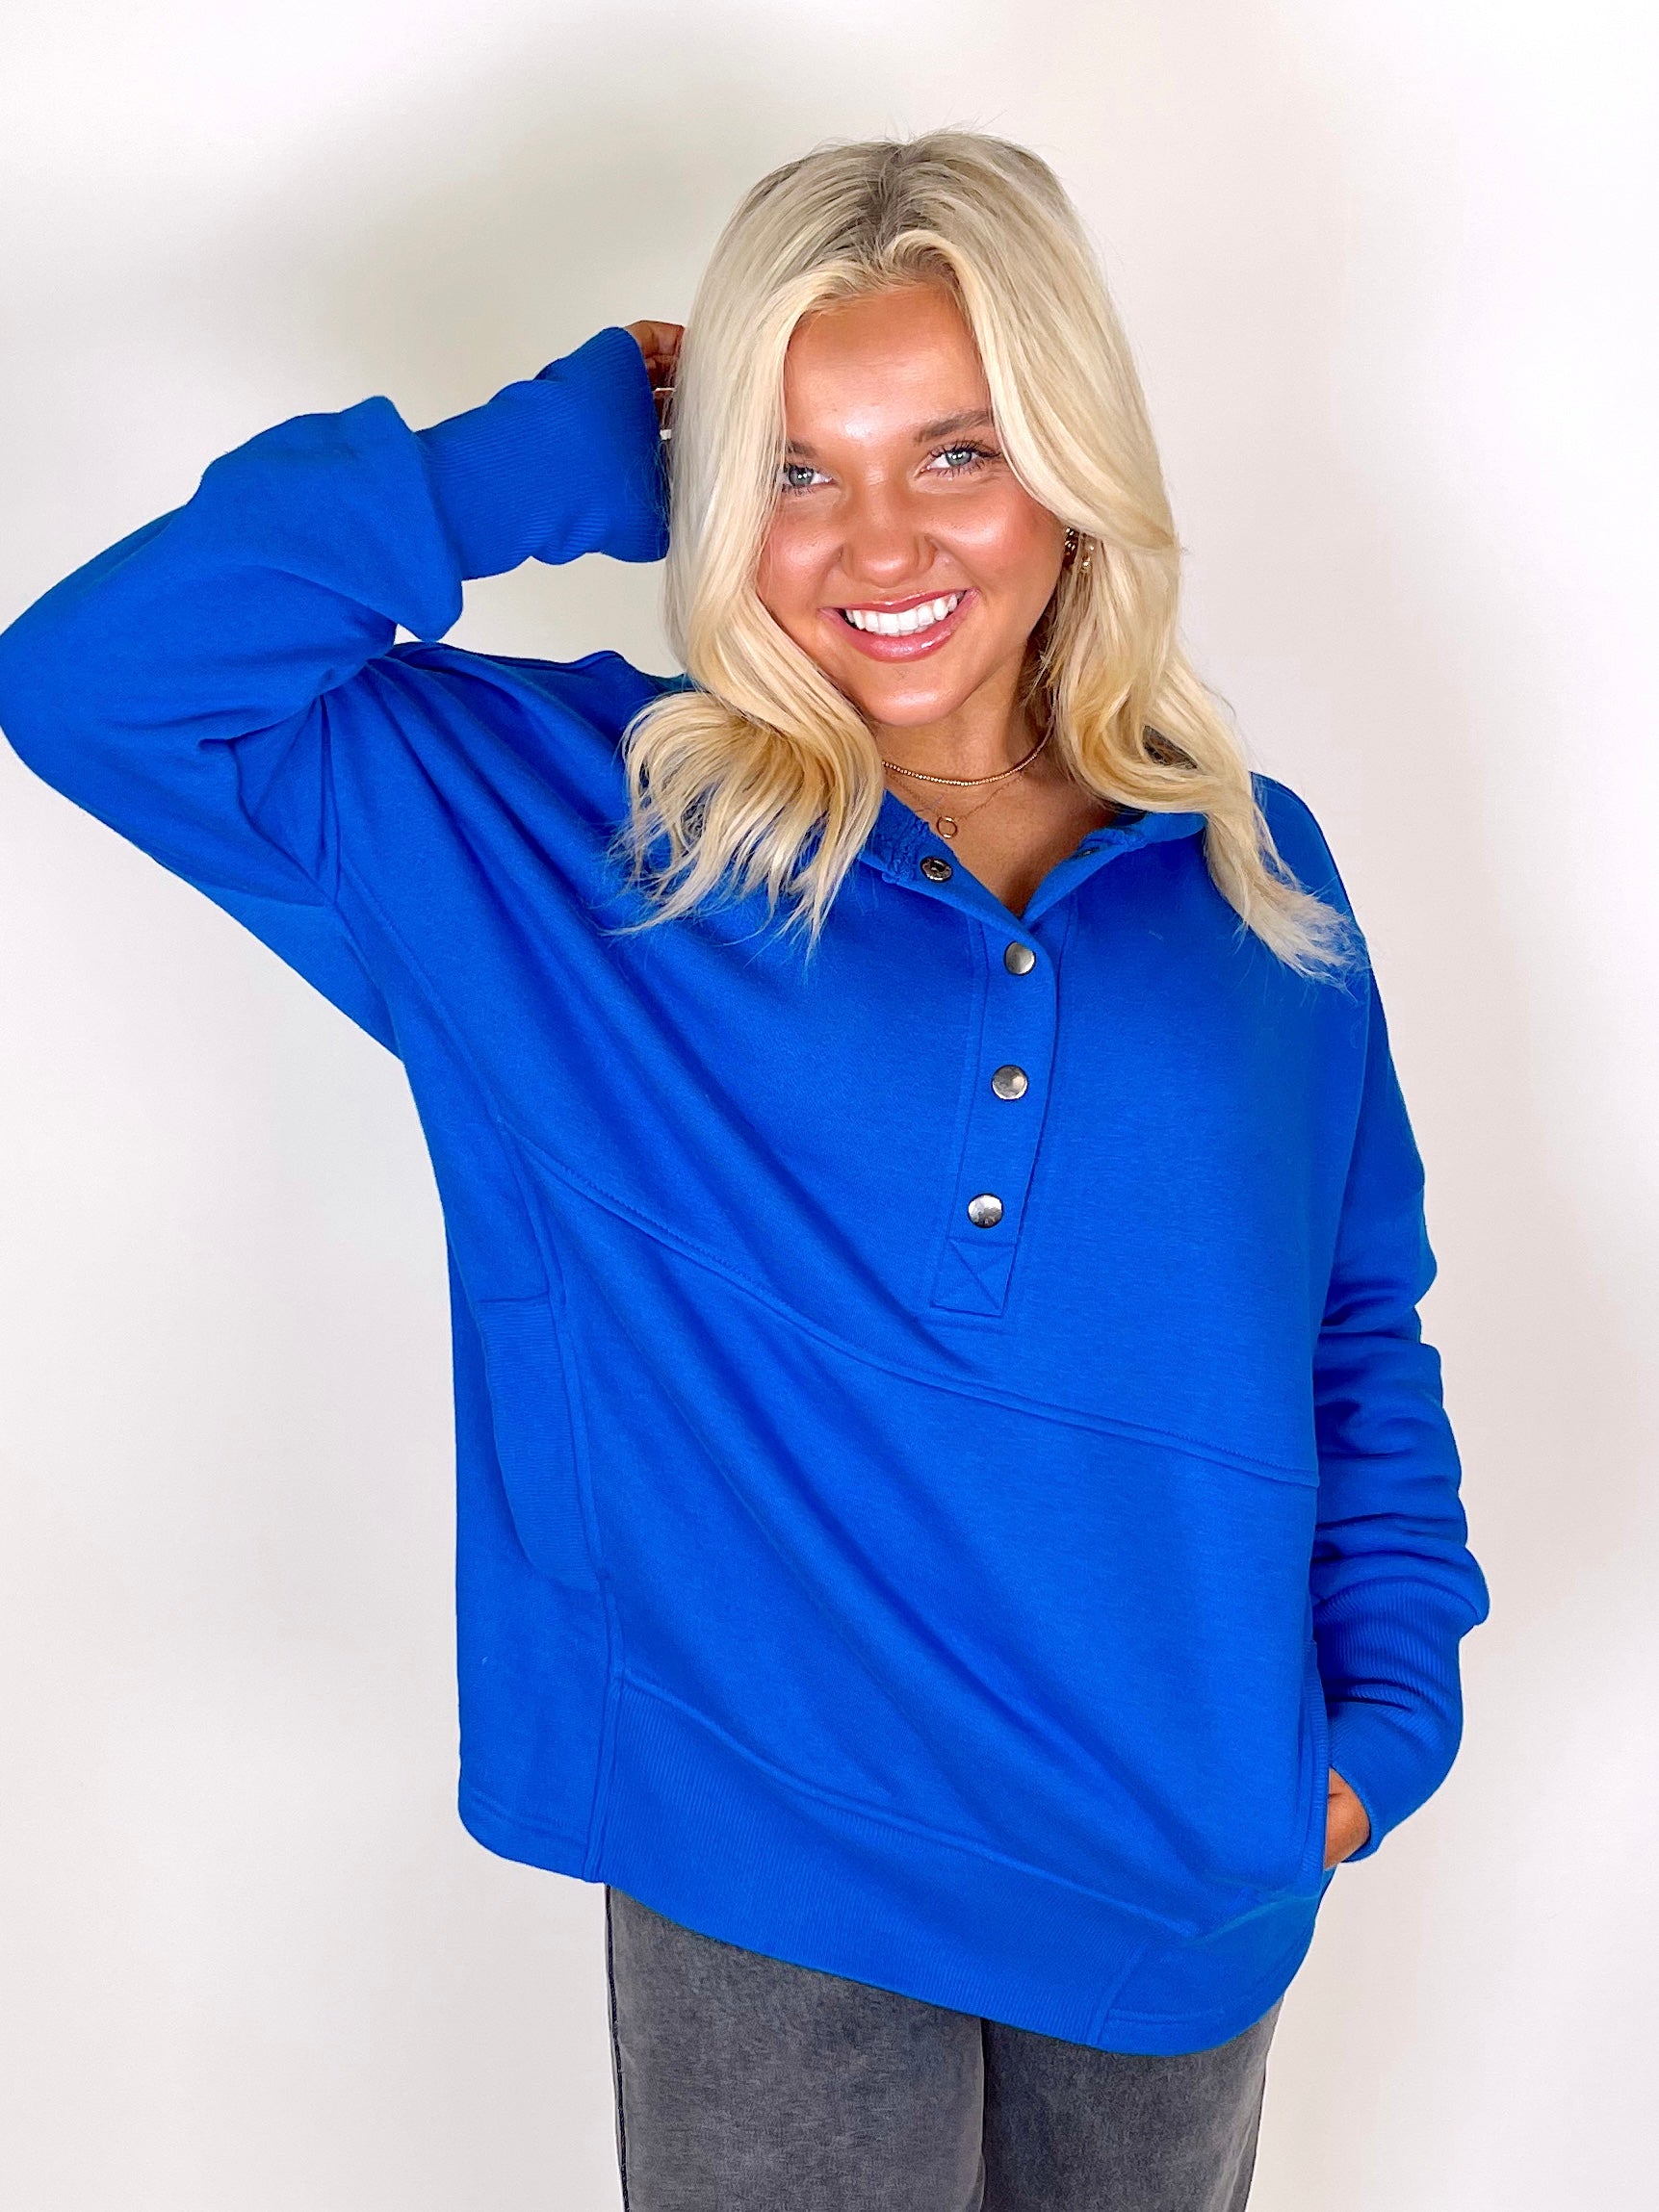 The Alexandra Pullover | DOORBUSTER-Pullover-Zenana-The Village Shoppe, Women’s Fashion Boutique, Shop Online and In Store - Located in Muscle Shoals, AL.